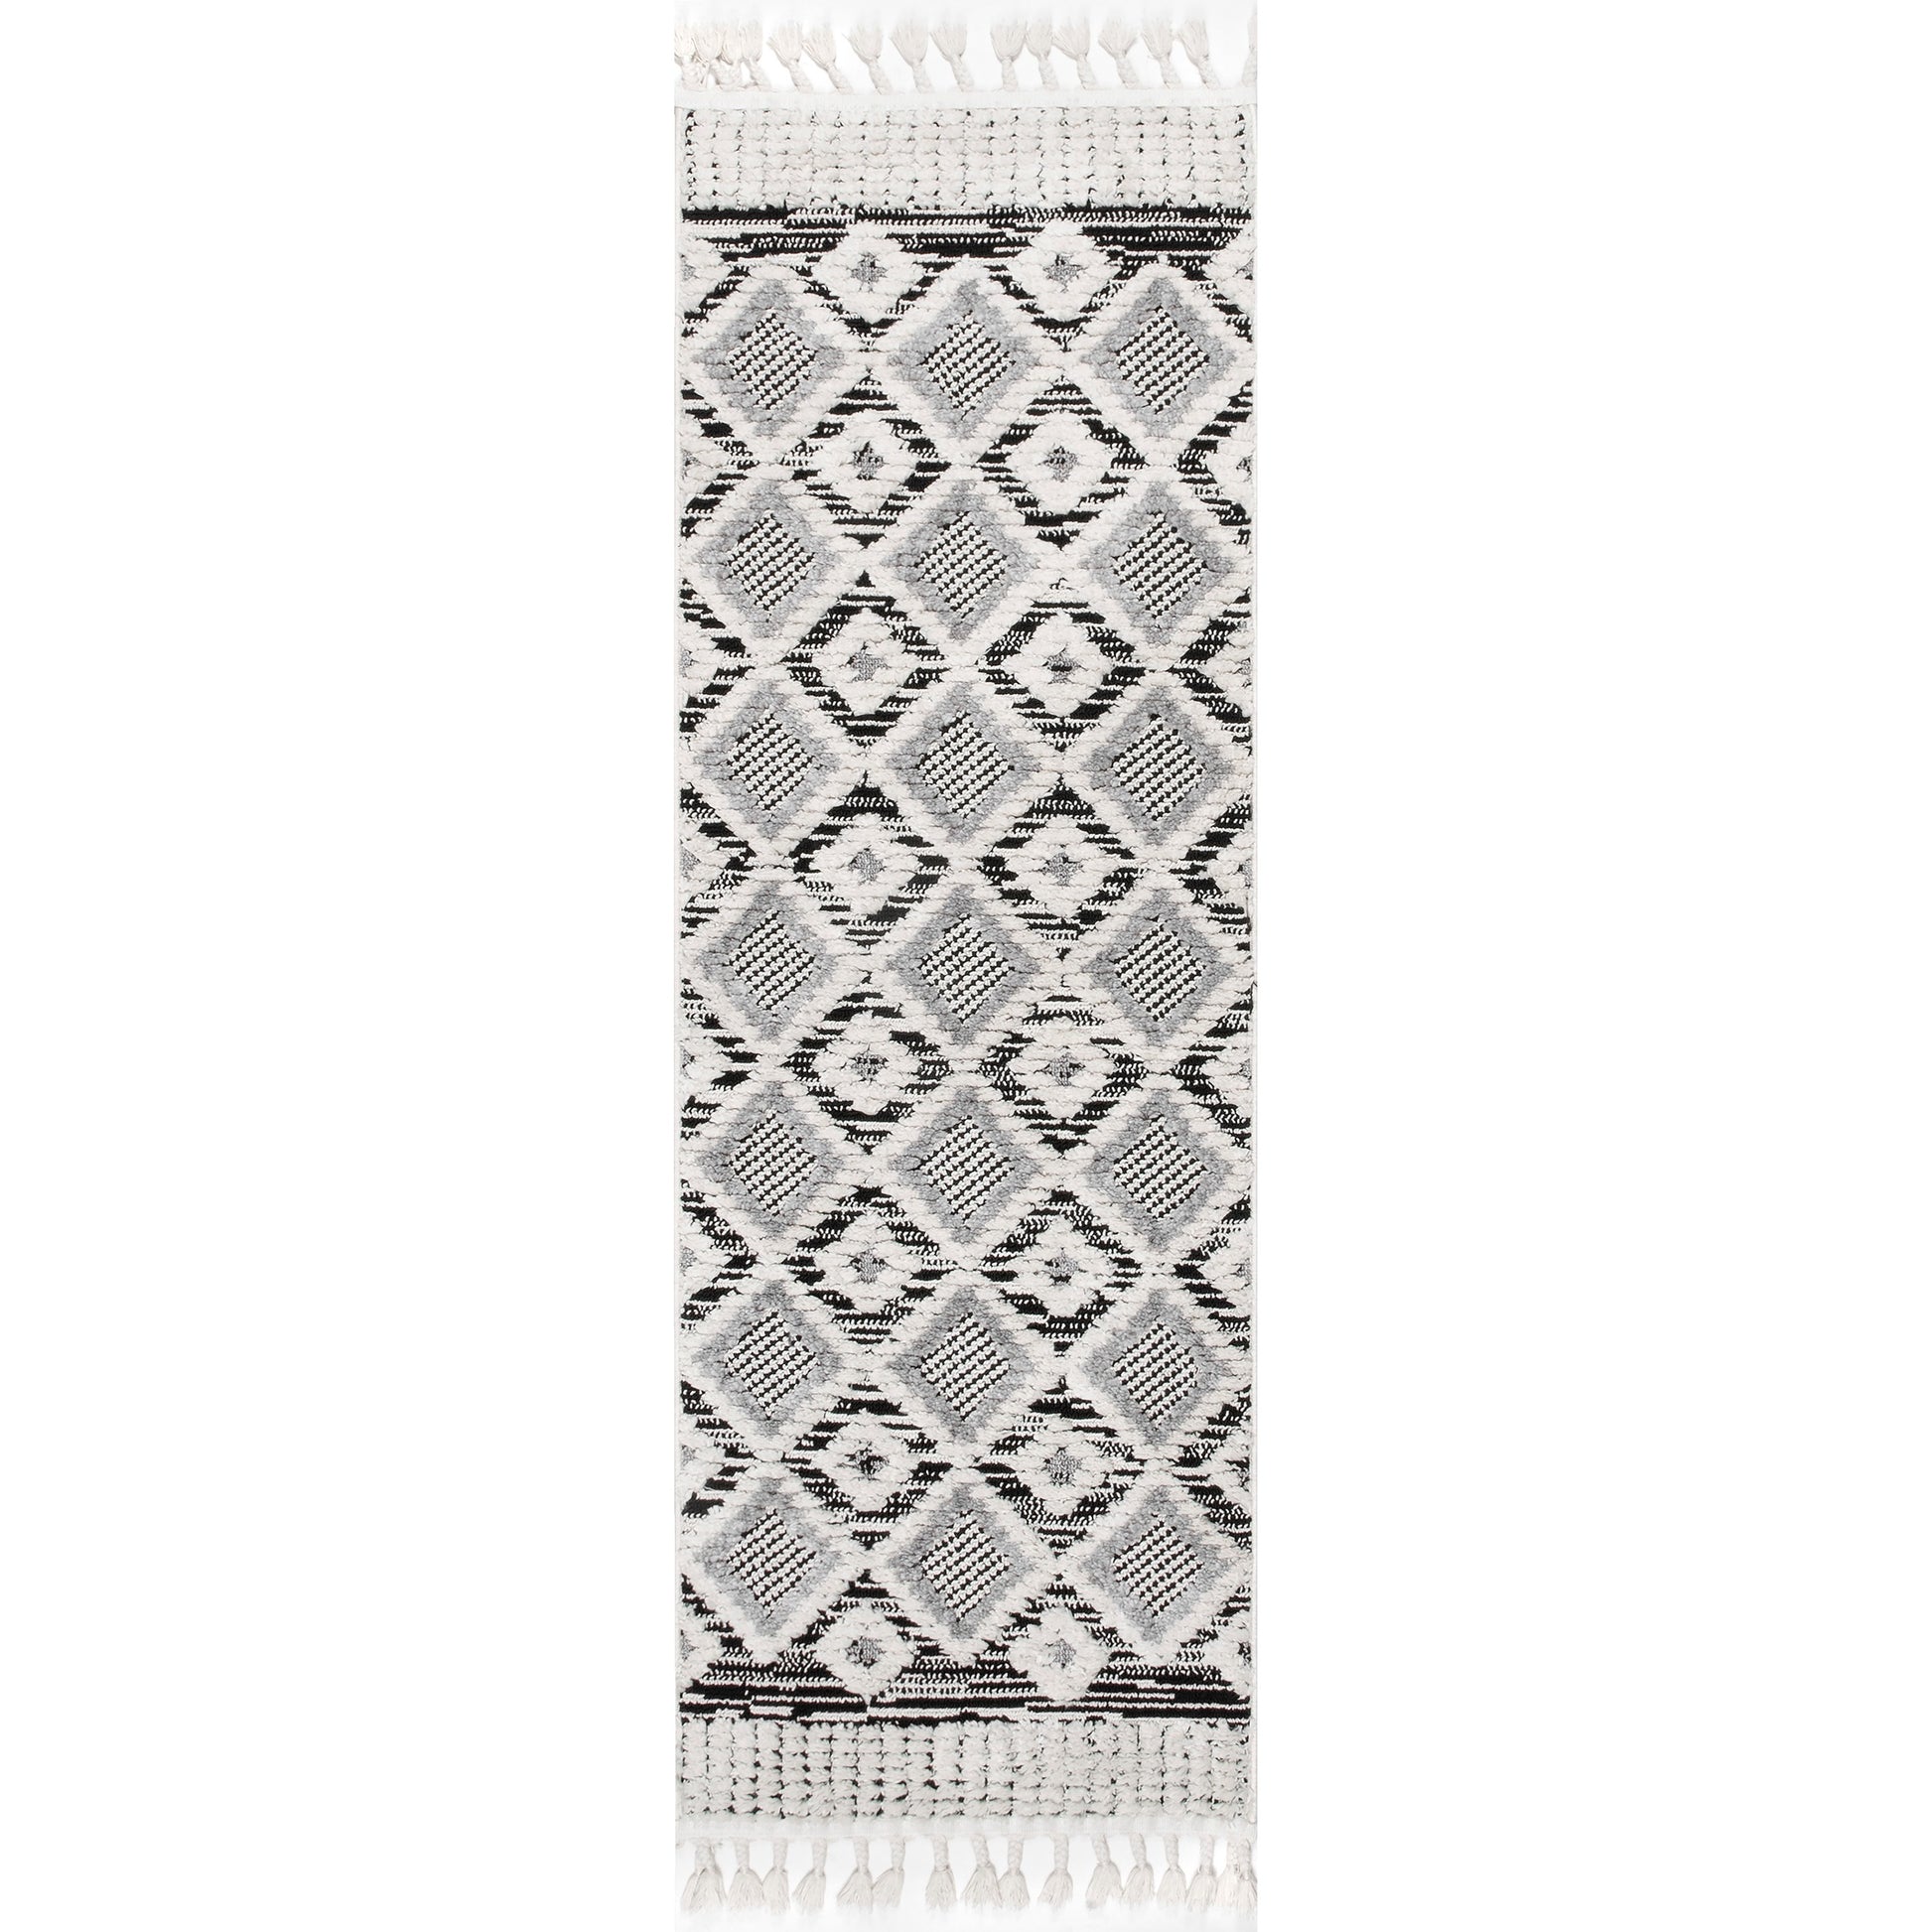 Nuloom Journey Checkered Tiles Njo2322A Gray Area Rug